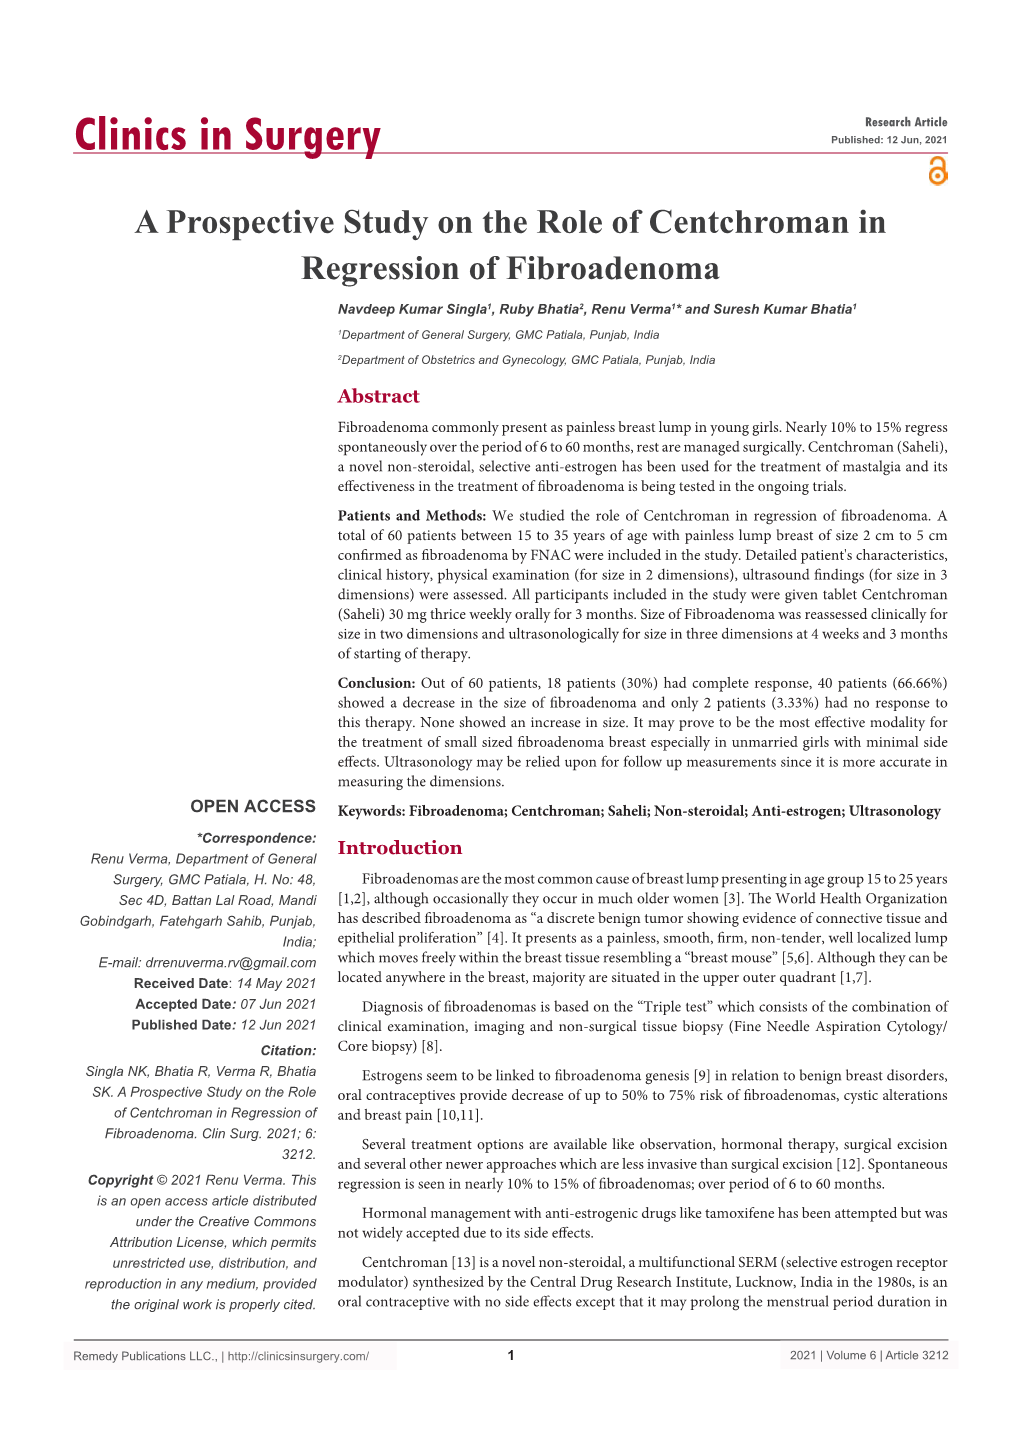 A Prospective Study on the Role of Centchroman in Regression of Fibroadenoma